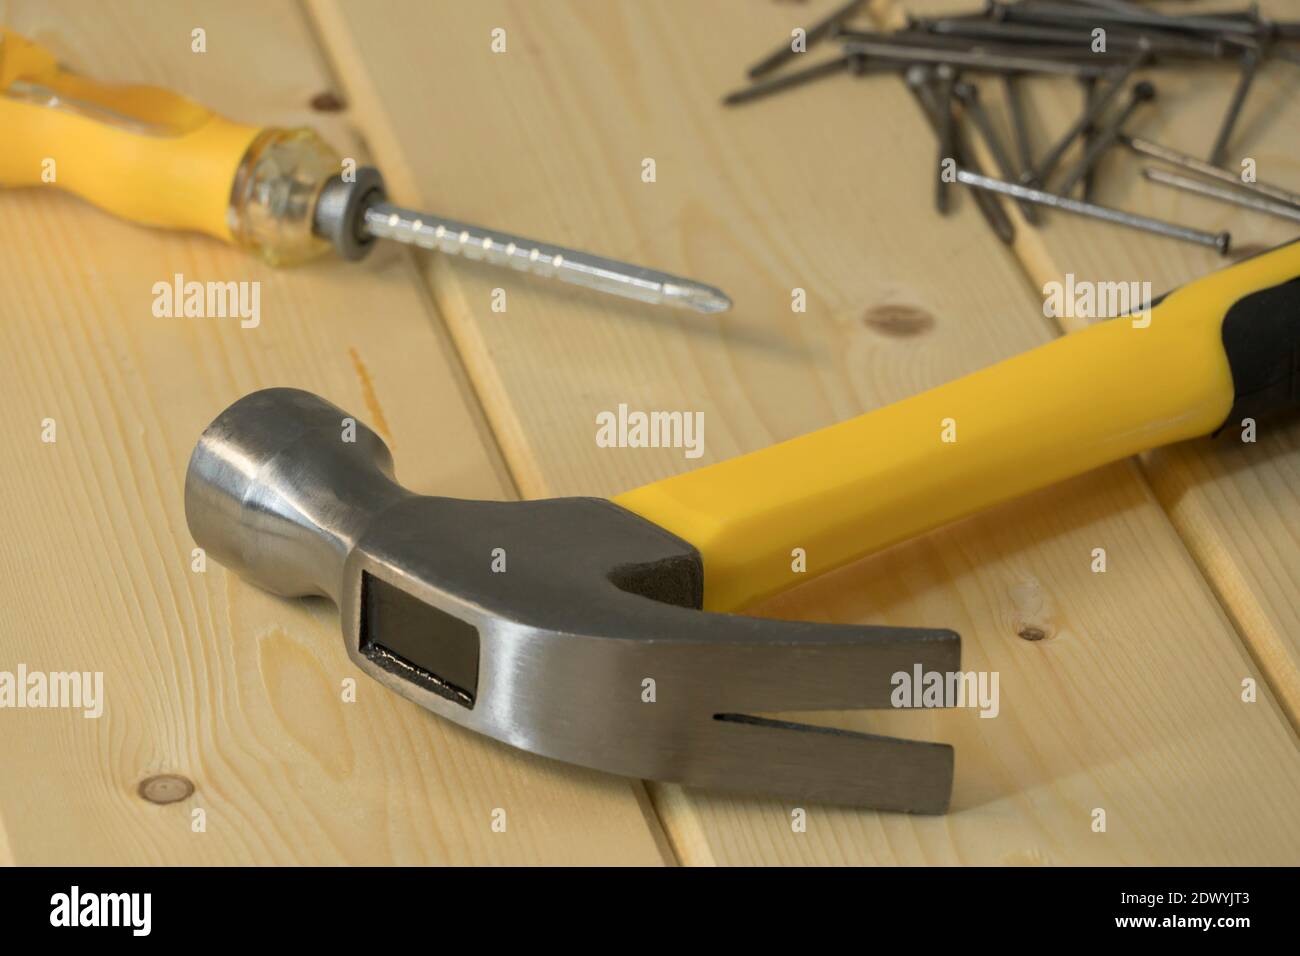 Assorted work tools on wood. Hand tools on a wooden background, hammer with nails and screwdriver. Home renovation, construction. Hand tools and equip Stock Photo